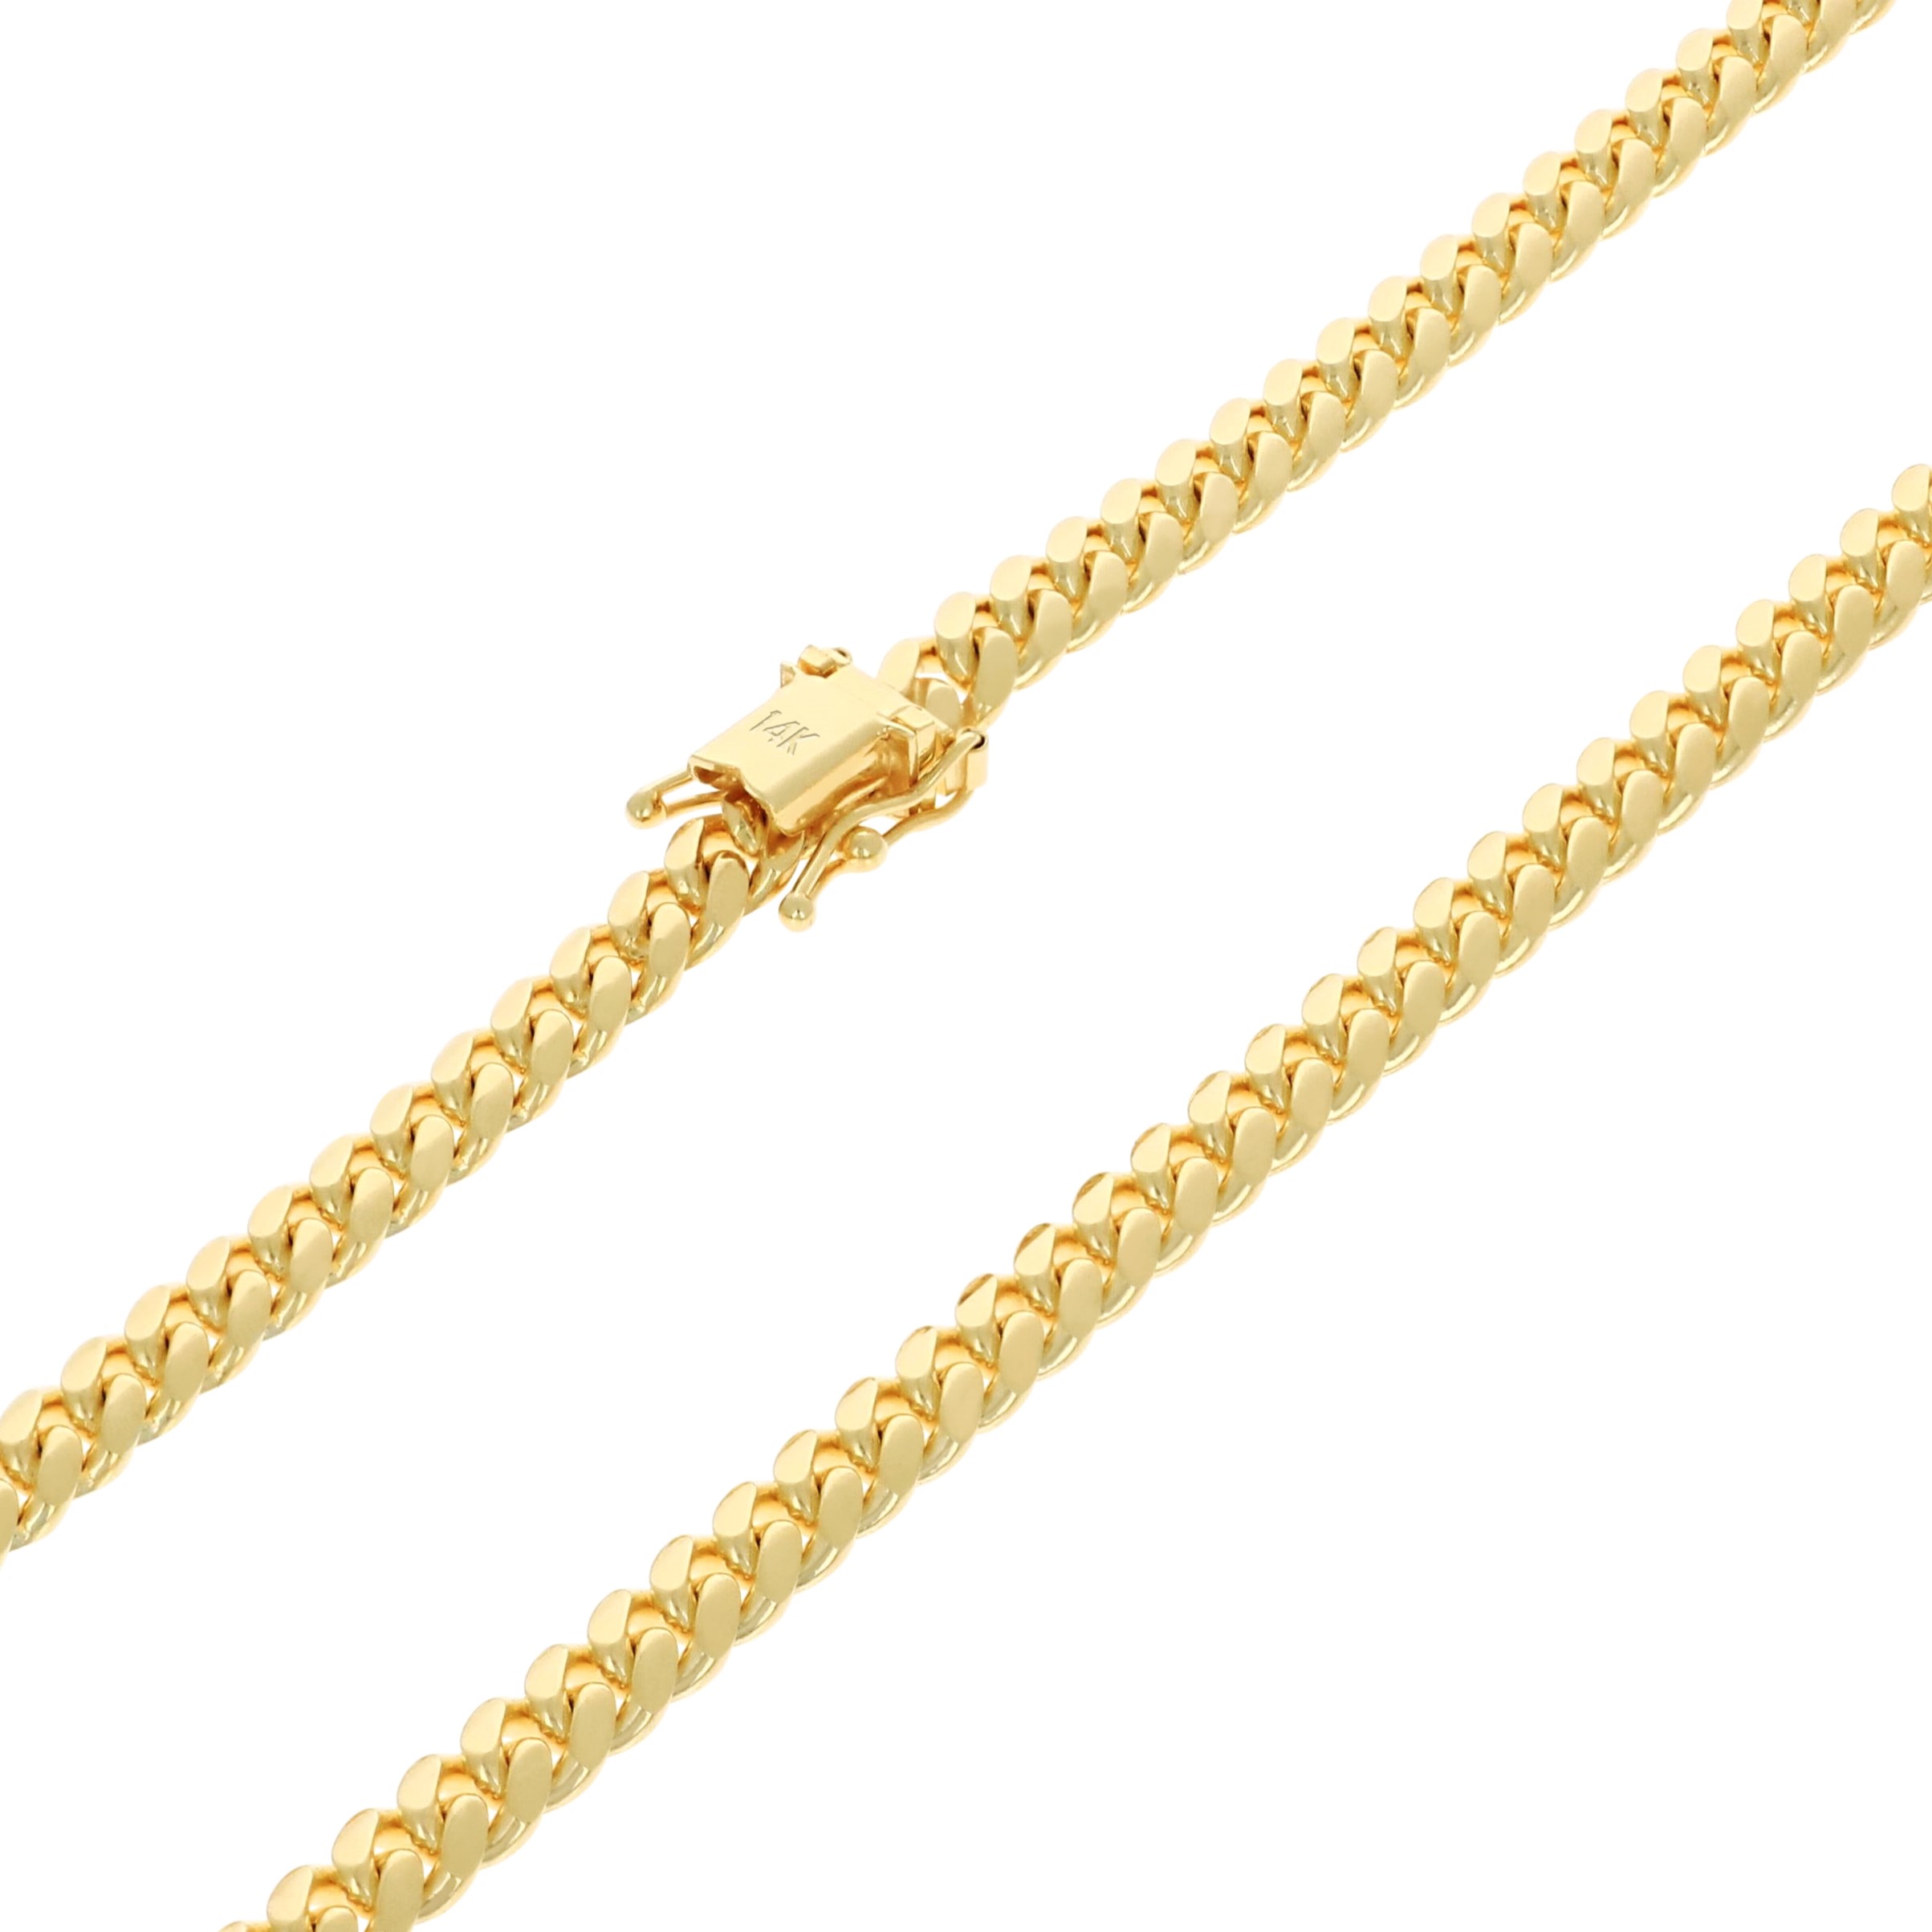 Nuragold 14k Yellow Gold 5mm Solid Miami Cuban Link Chain Pendant Necklace, Mens Jewelry Box Clasp 16" - 30" - image 5 of 11